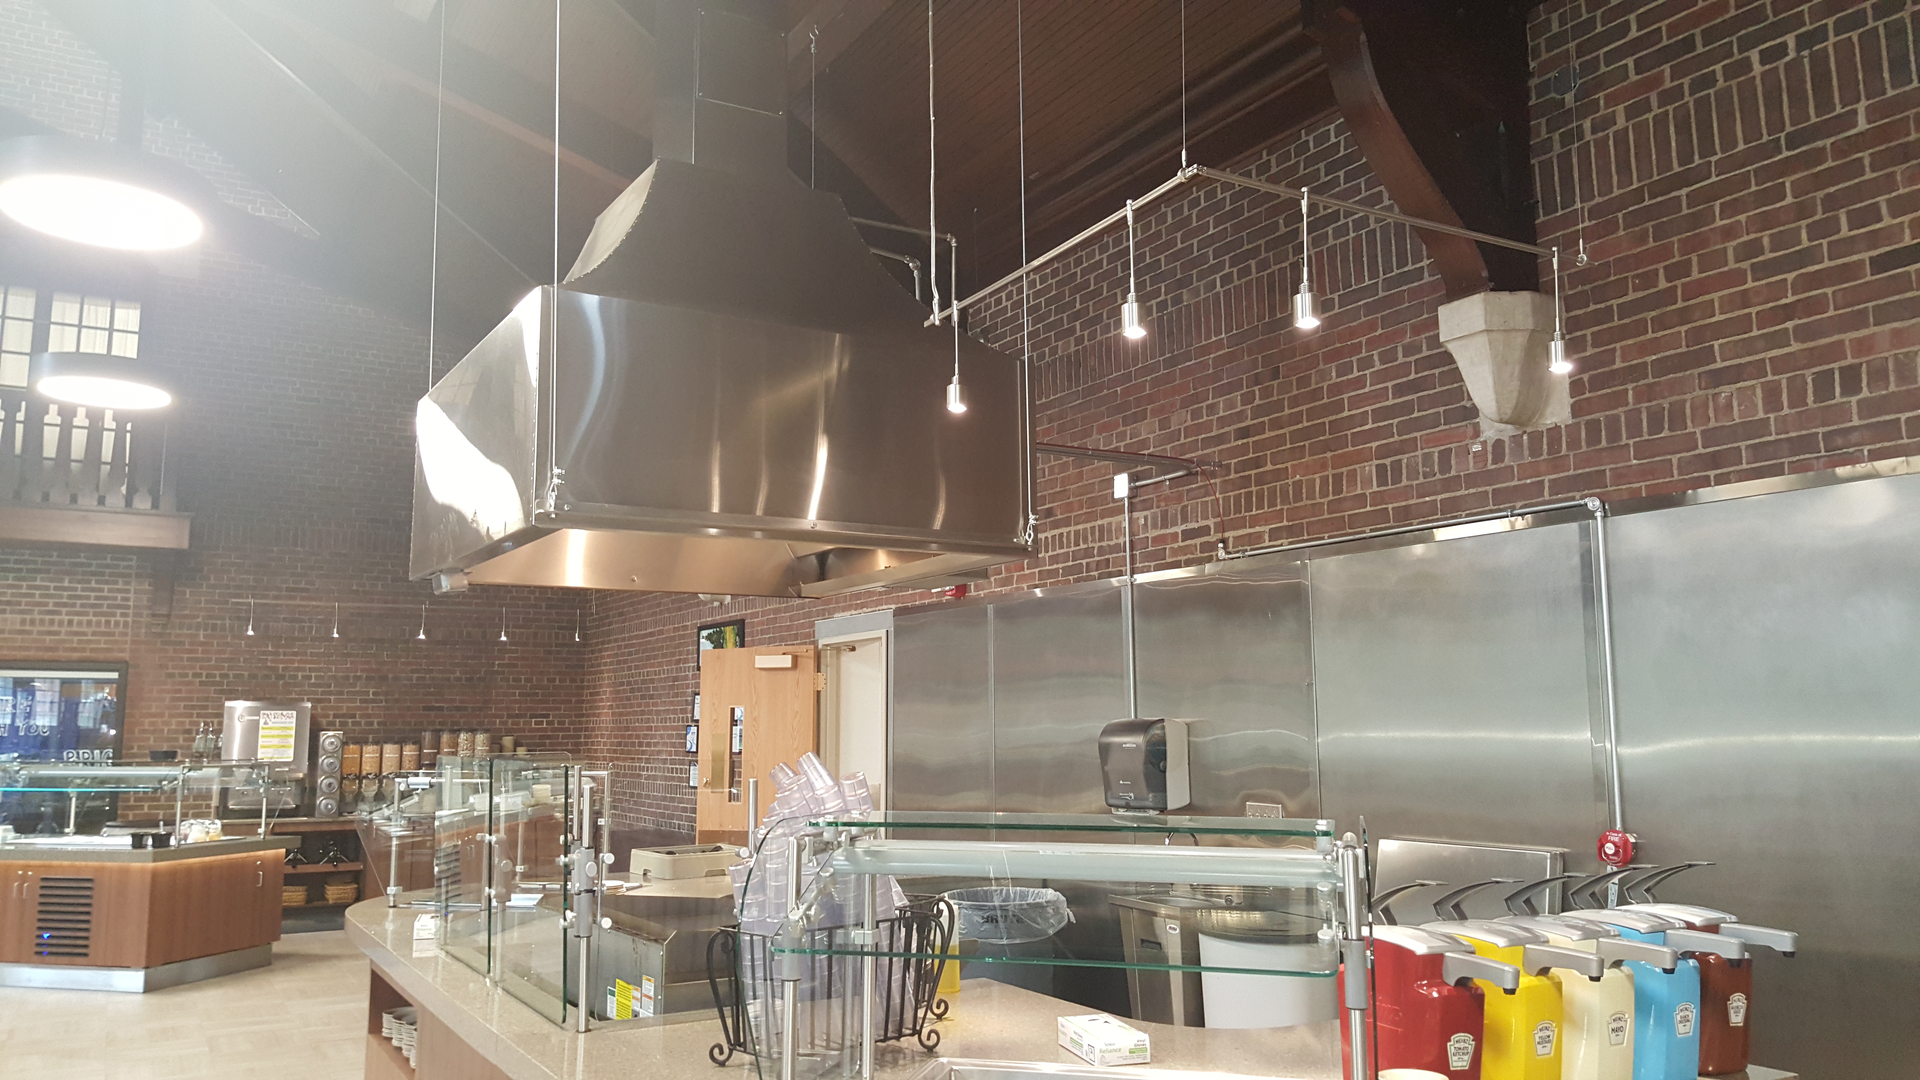 Commercial kitchen steel vents